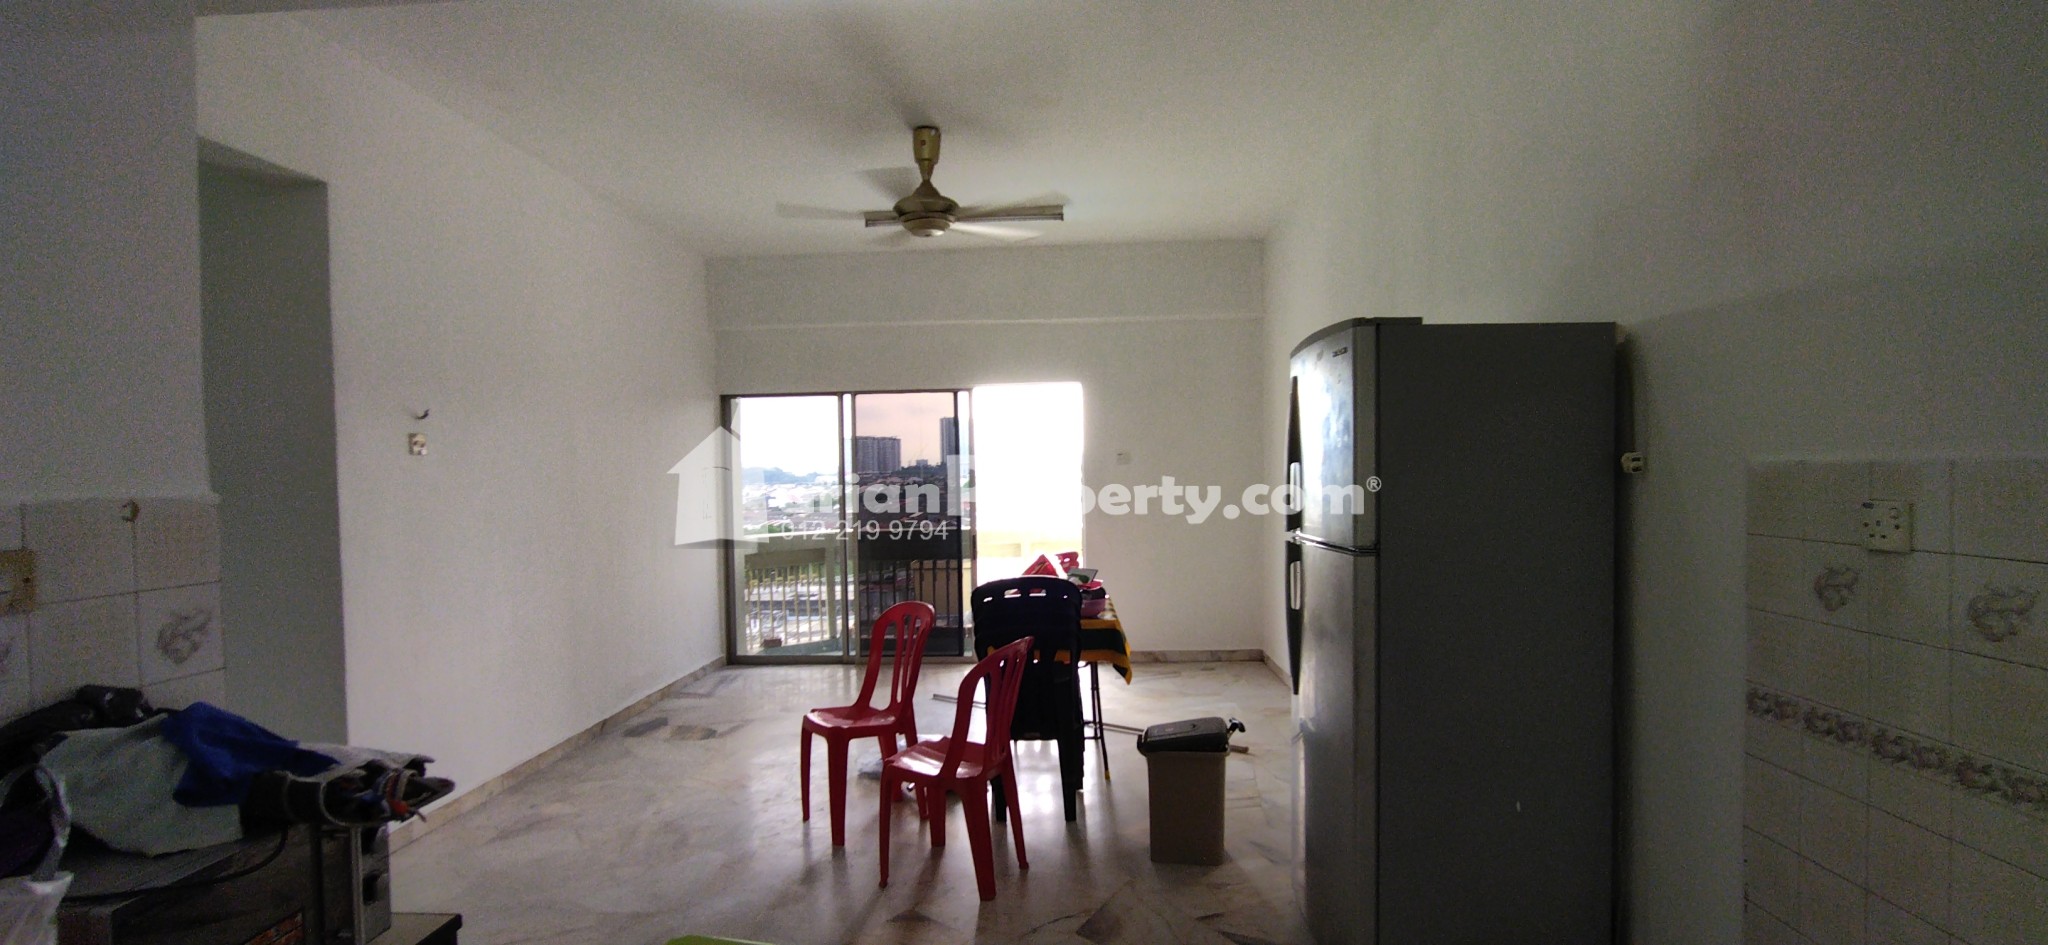 Condo For Sale at Petaling Indah